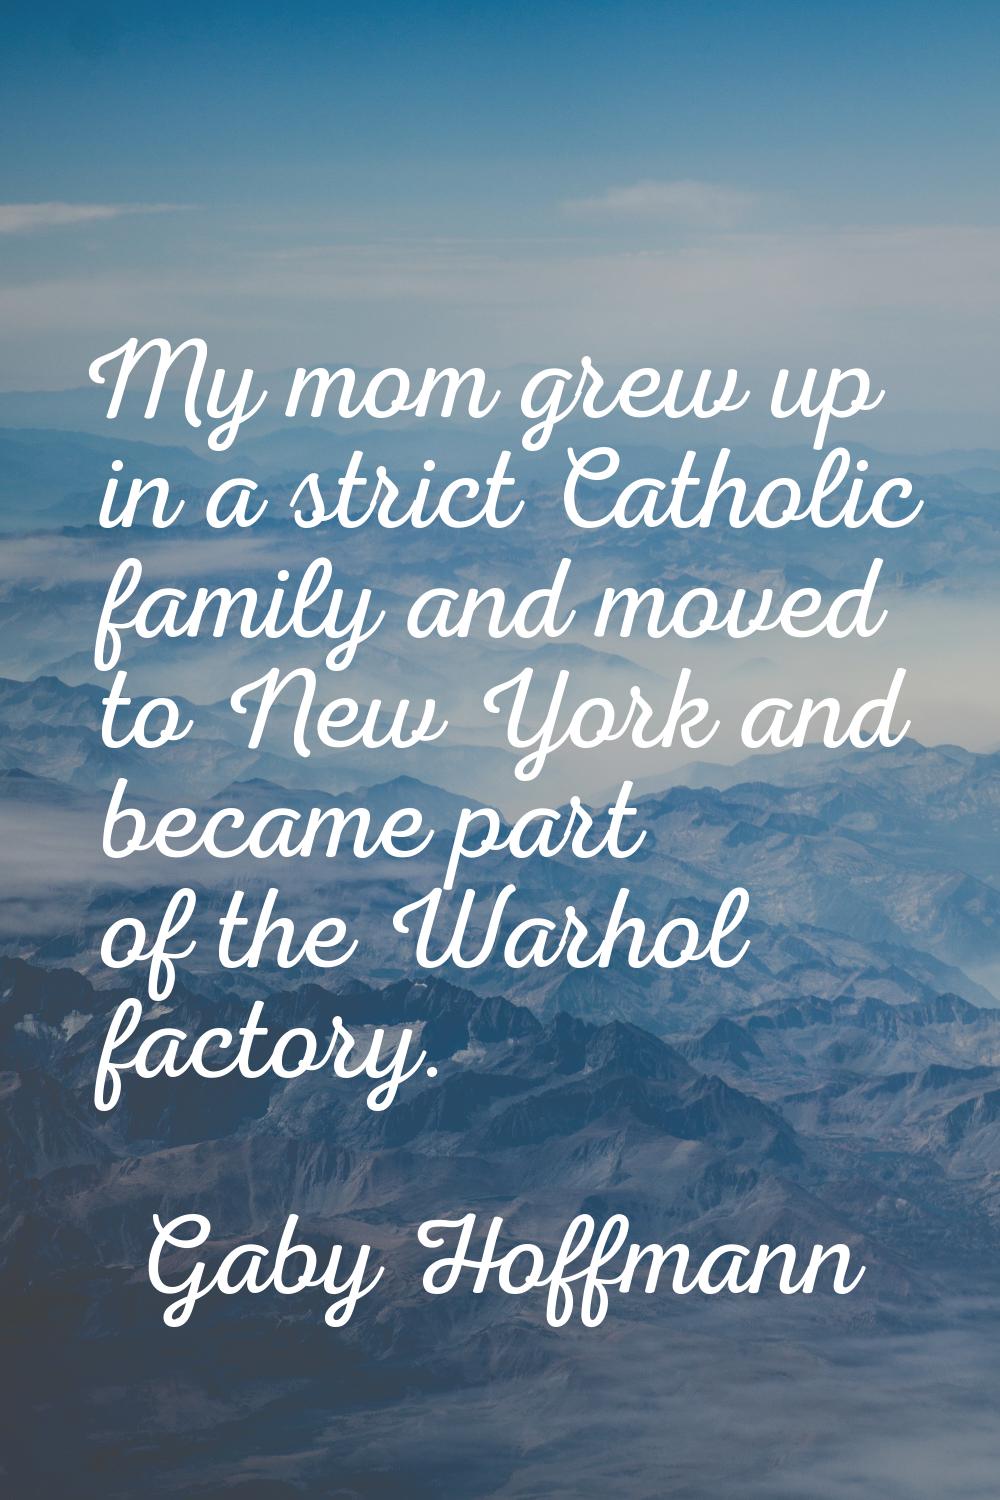 My mom grew up in a strict Catholic family and moved to New York and became part of the Warhol fact